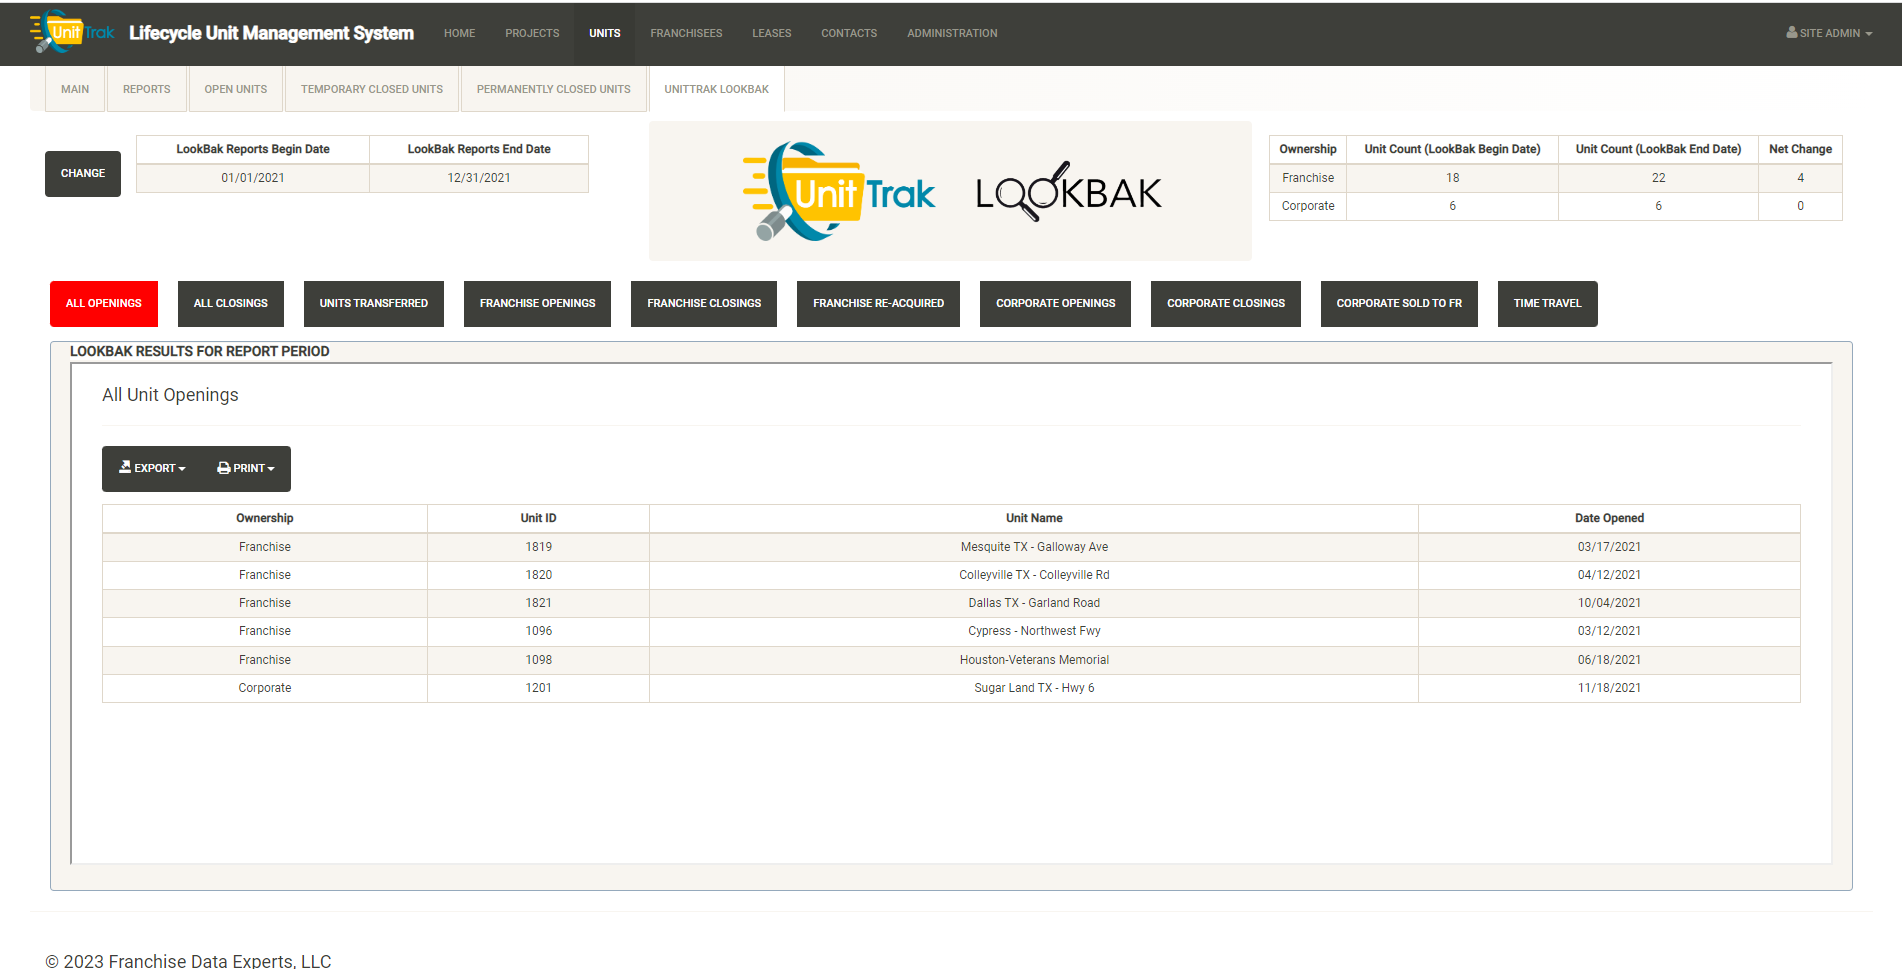 UnitTrak LookBak makes historical research and reporting simple. Choose a custom reporting period and quickly view the number of openings, closures and transfers with key details. LookBak simplifies compliance reporting including FDD reporting.